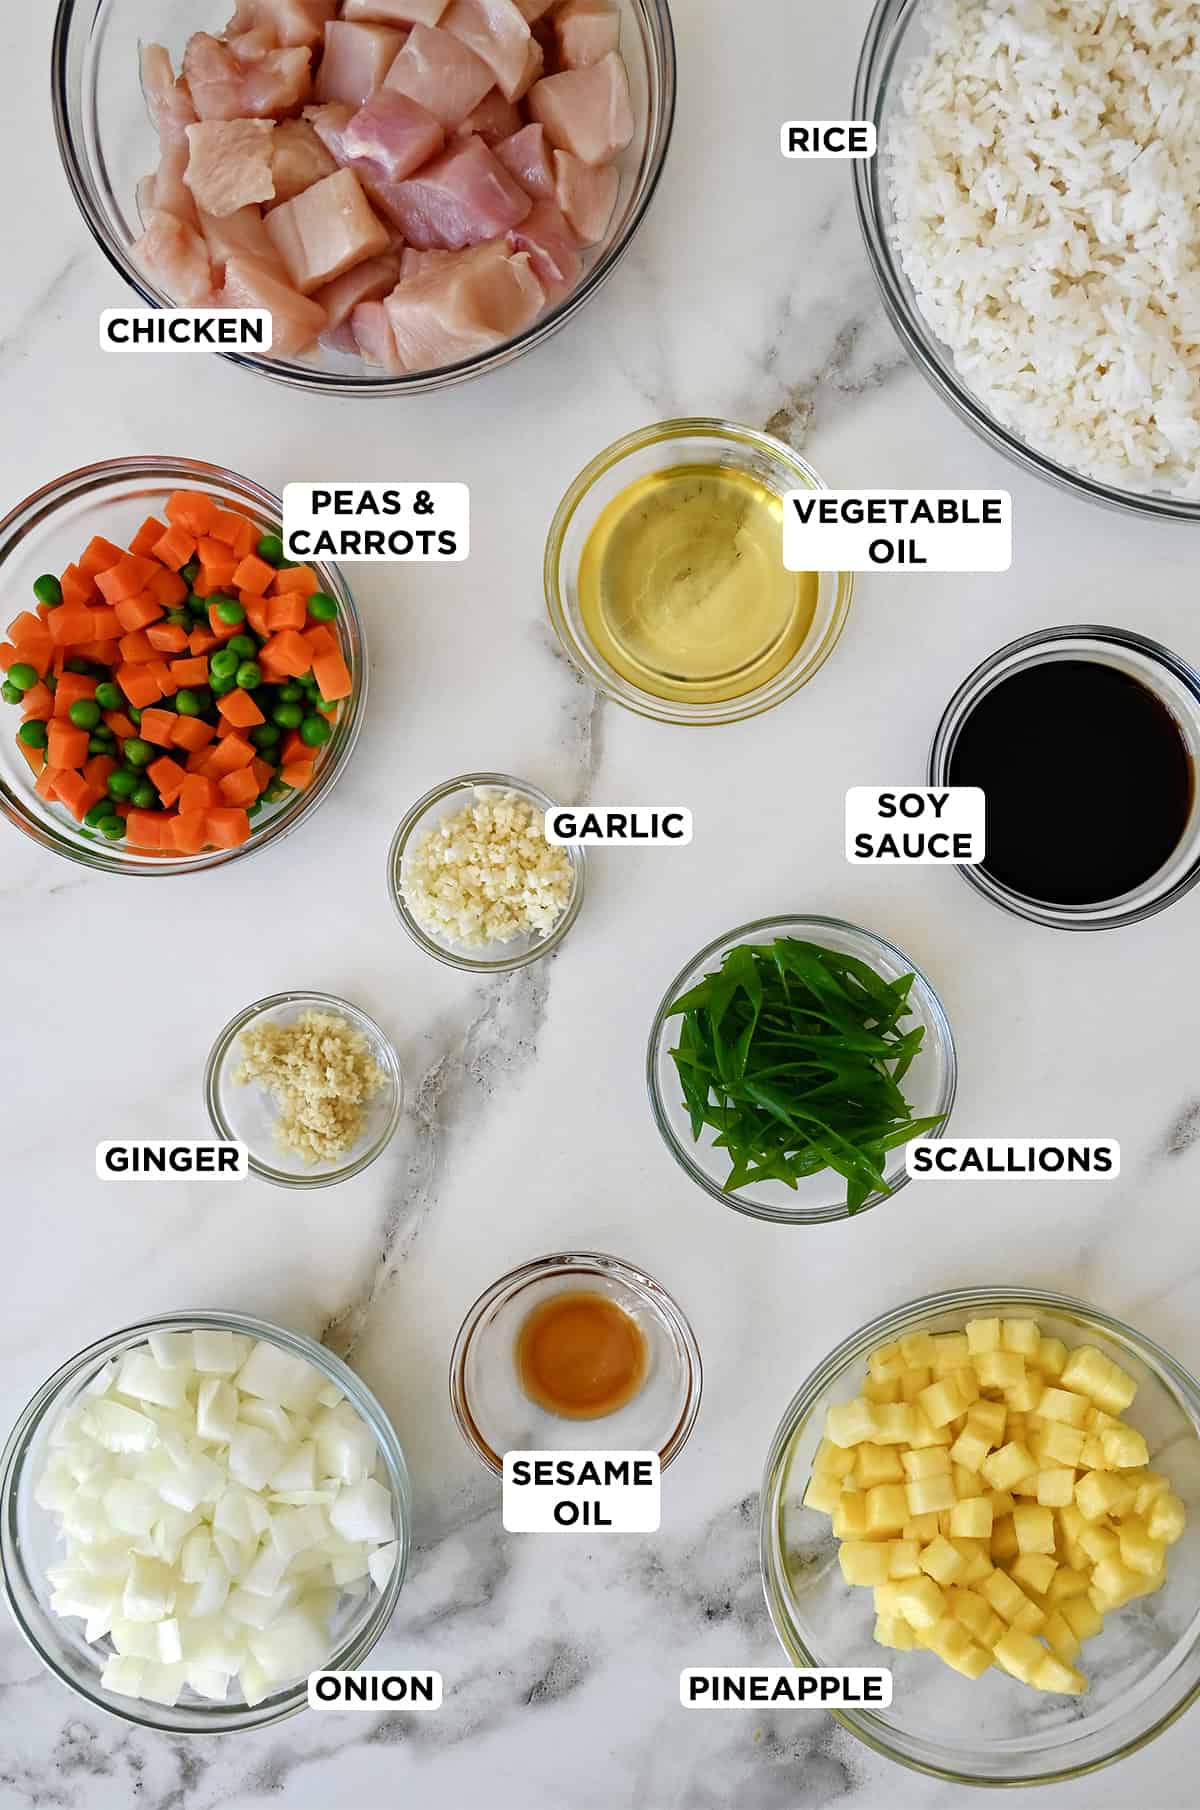 Ingredients for pineapple chicken fried rice in various sizes of glass bowls, including diced chicken breasts, day-old rice, vegetable oil, soy sauce, garlic, peas and carrots, scallions, ginger, sesame oil, diced pineapple and onions.